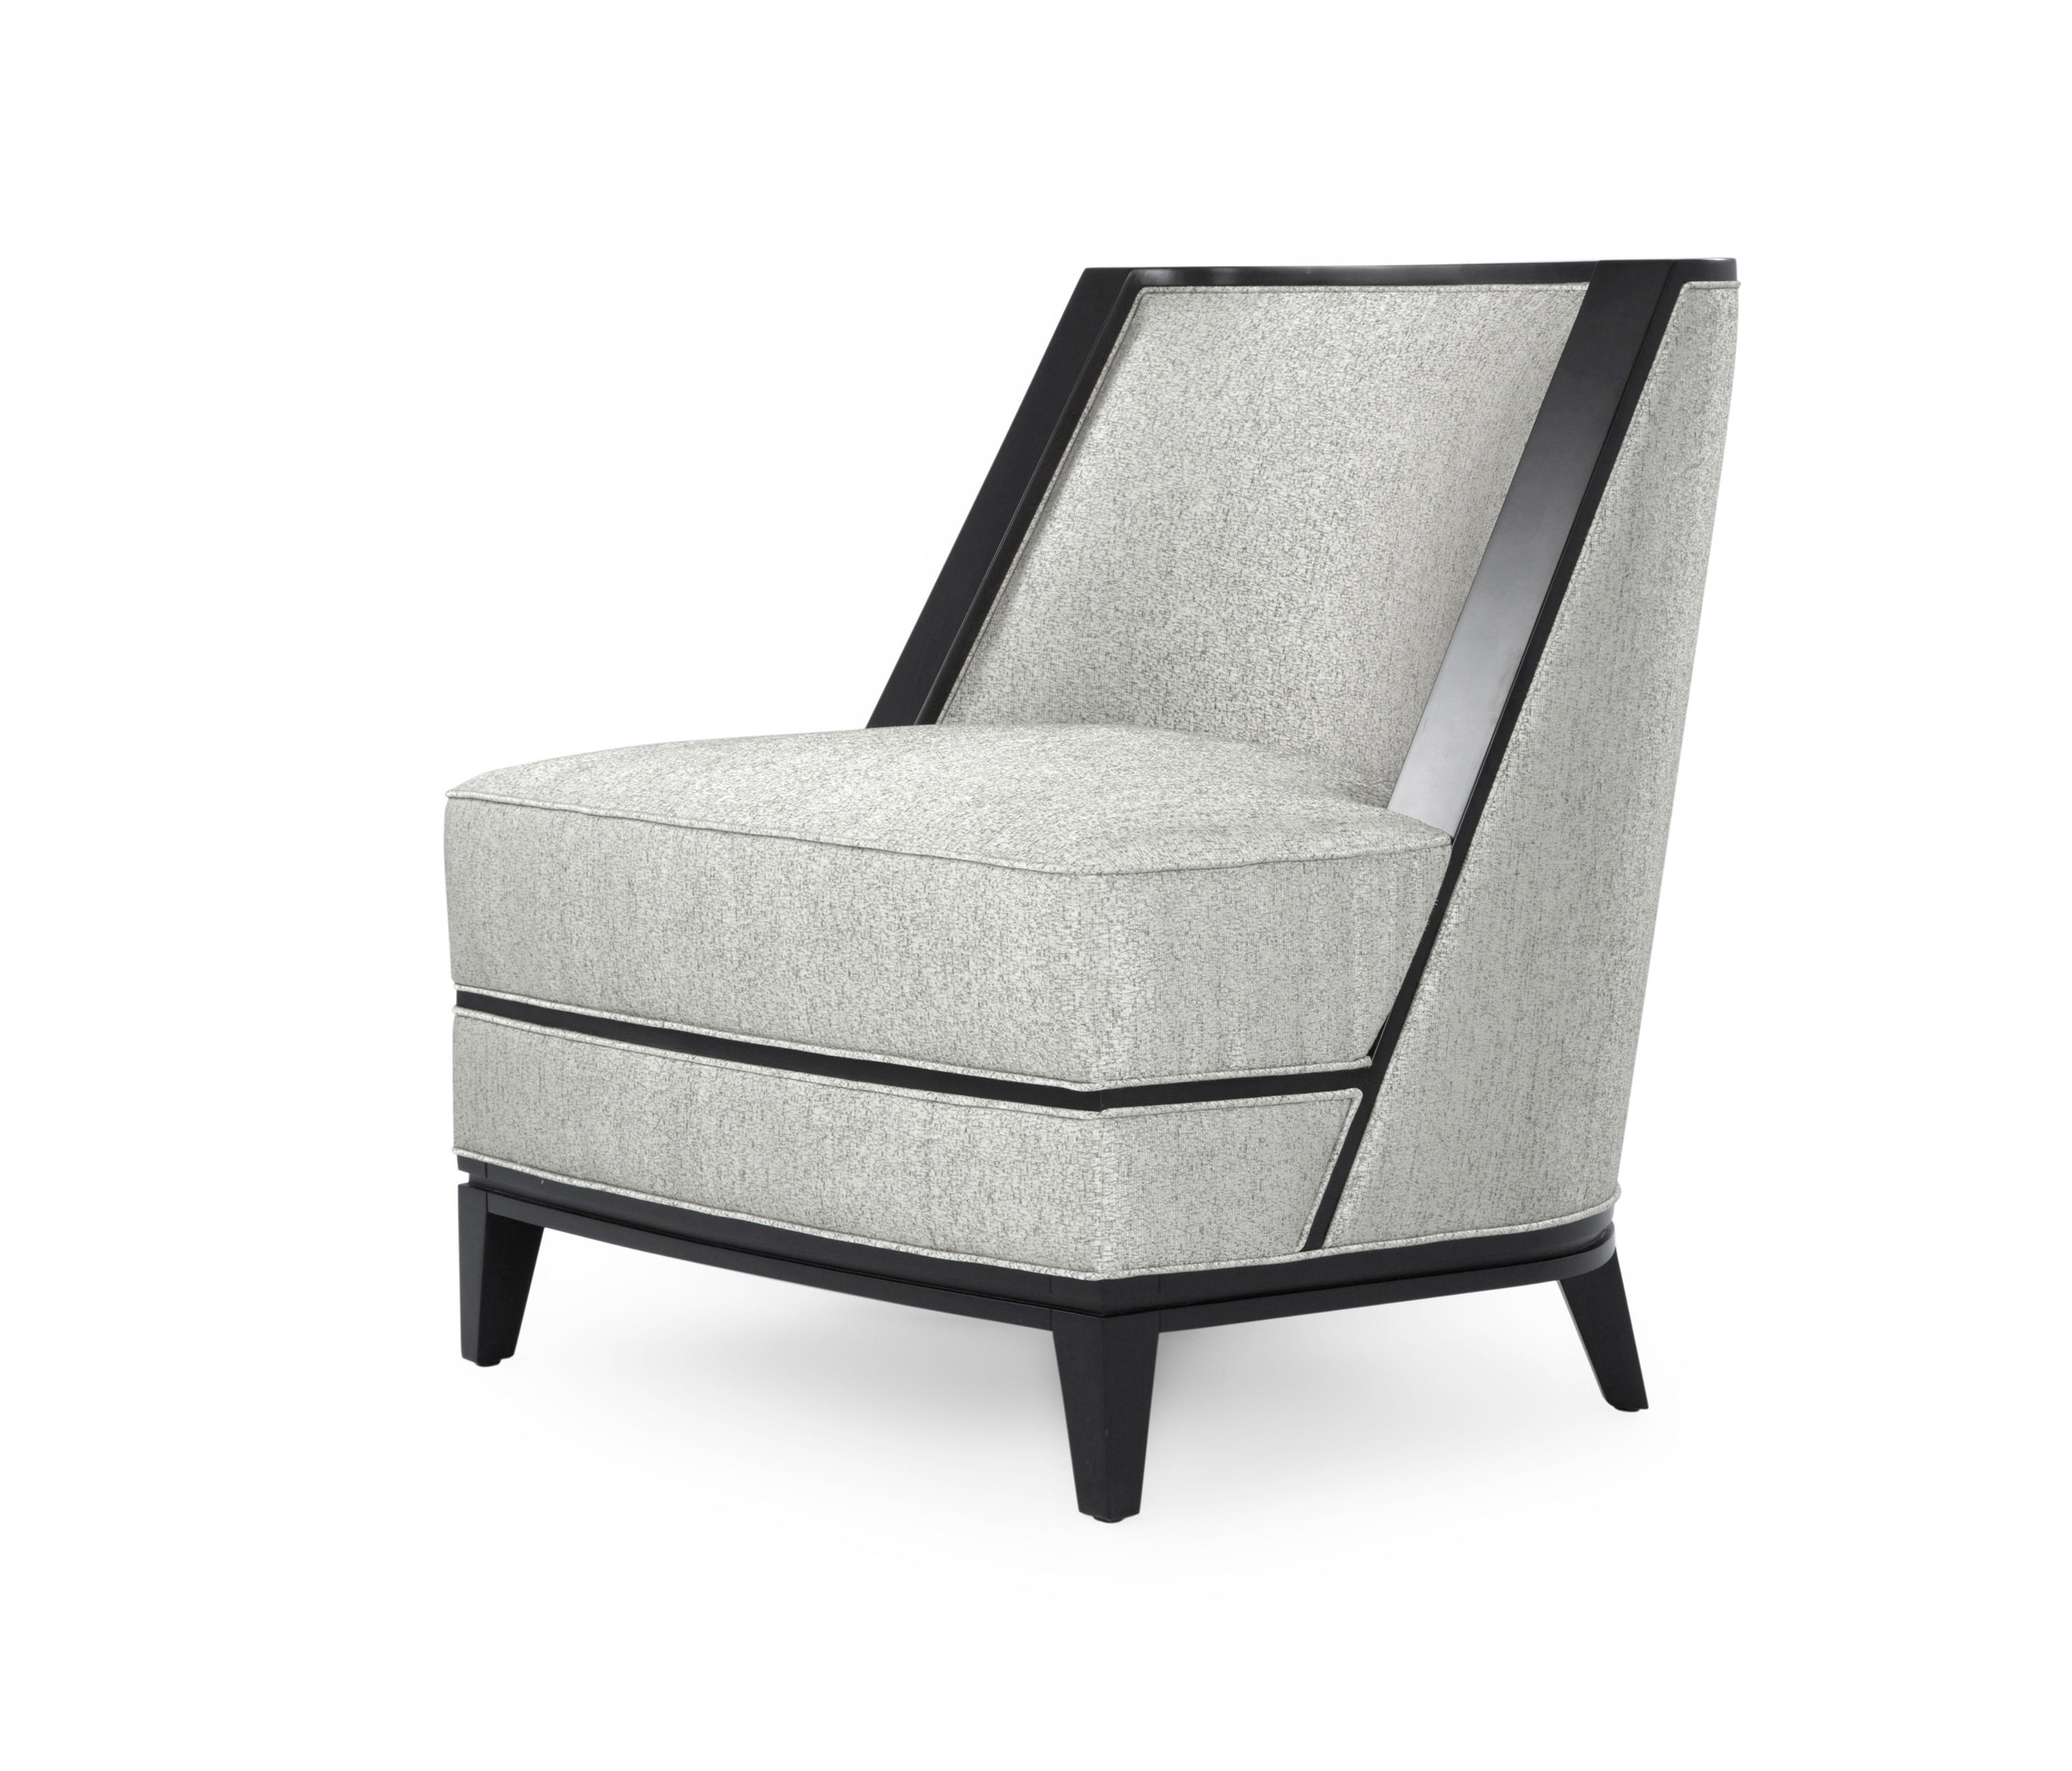 Sloane occasional chair | Architonic